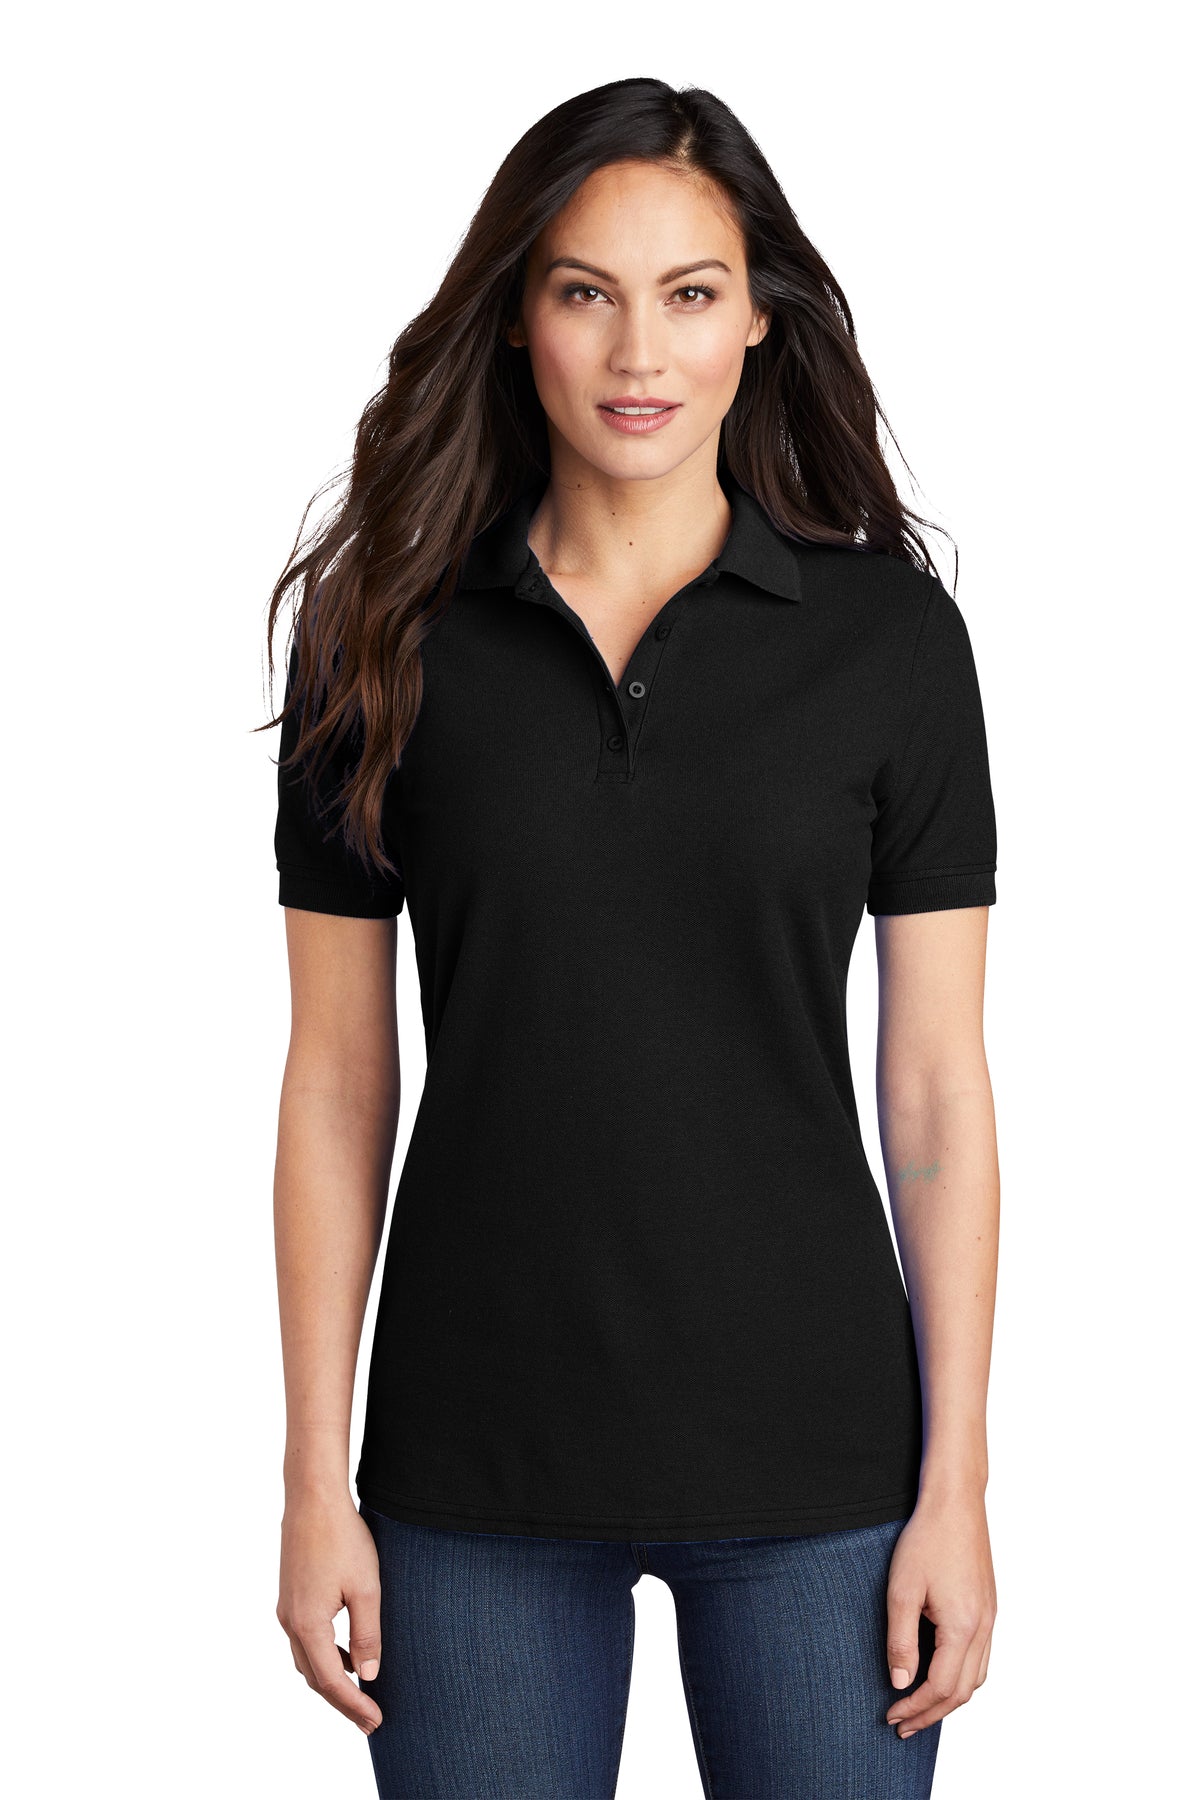 Tattnall - Ladies Cotton Pique Polo with Crest - Black (LKP155) - Southern Grace Creations